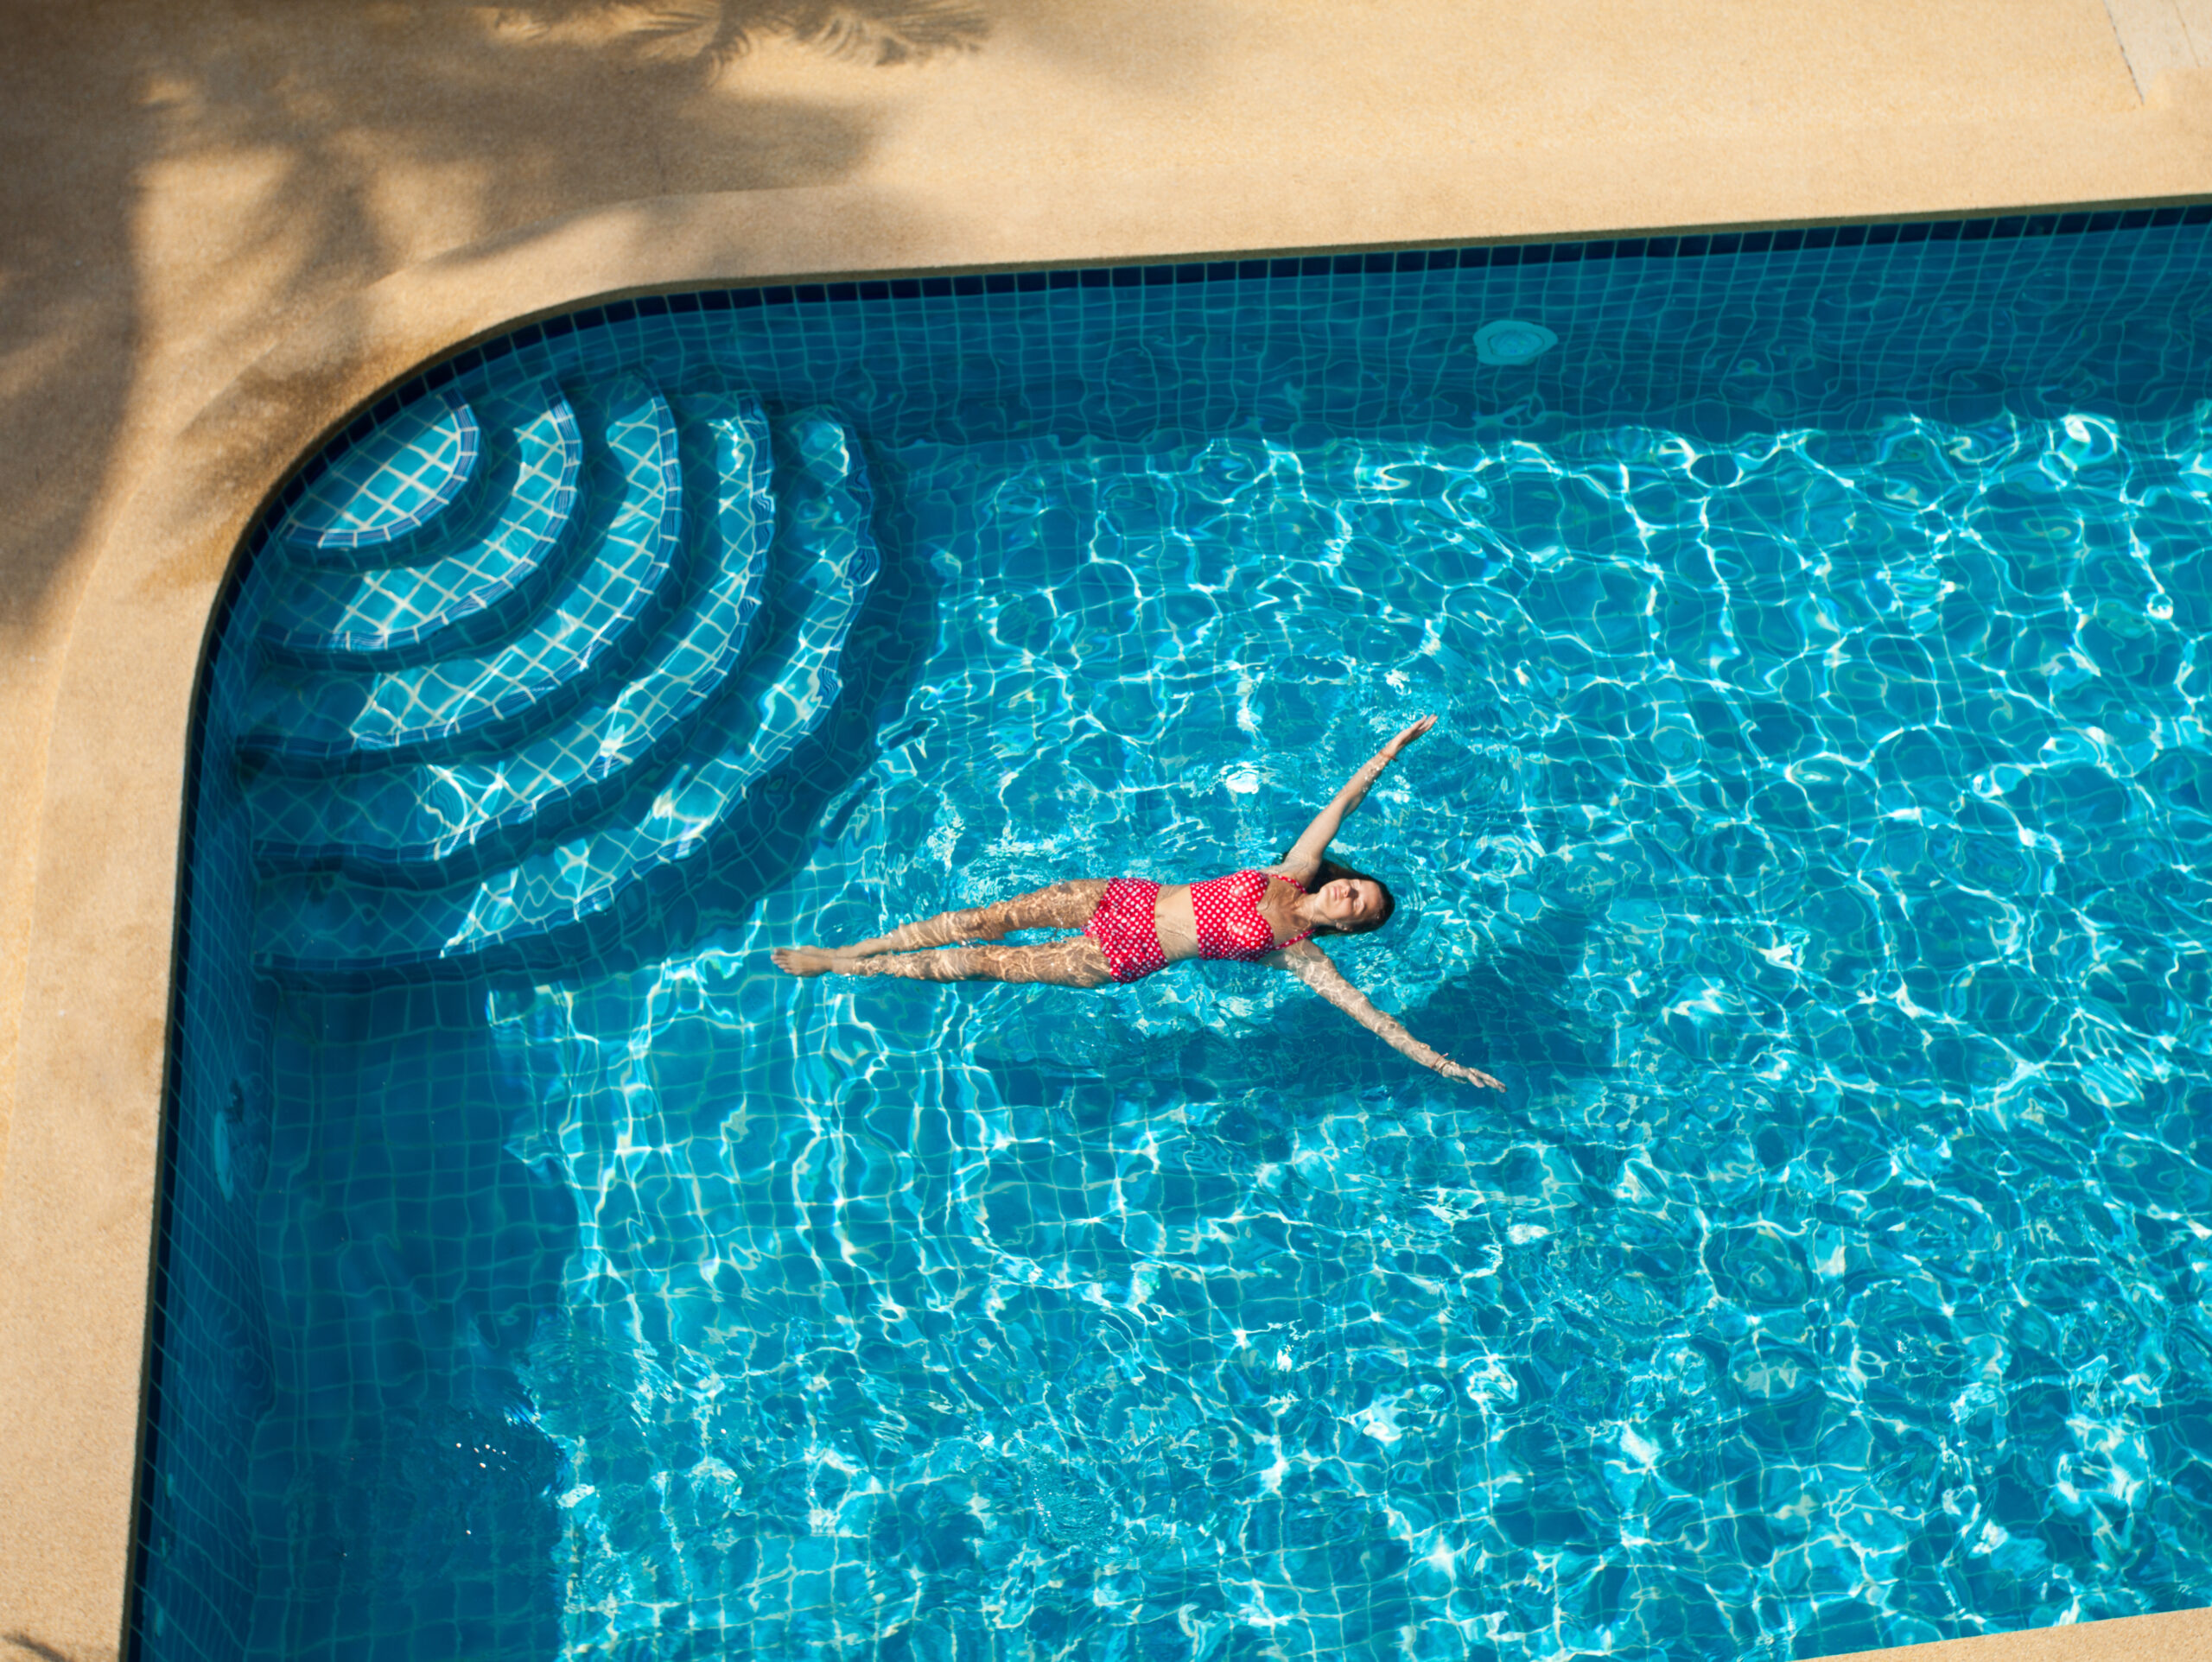 A woman relaxing while floating in a pool, enjoying a peaceful and leisurely moment in the water.